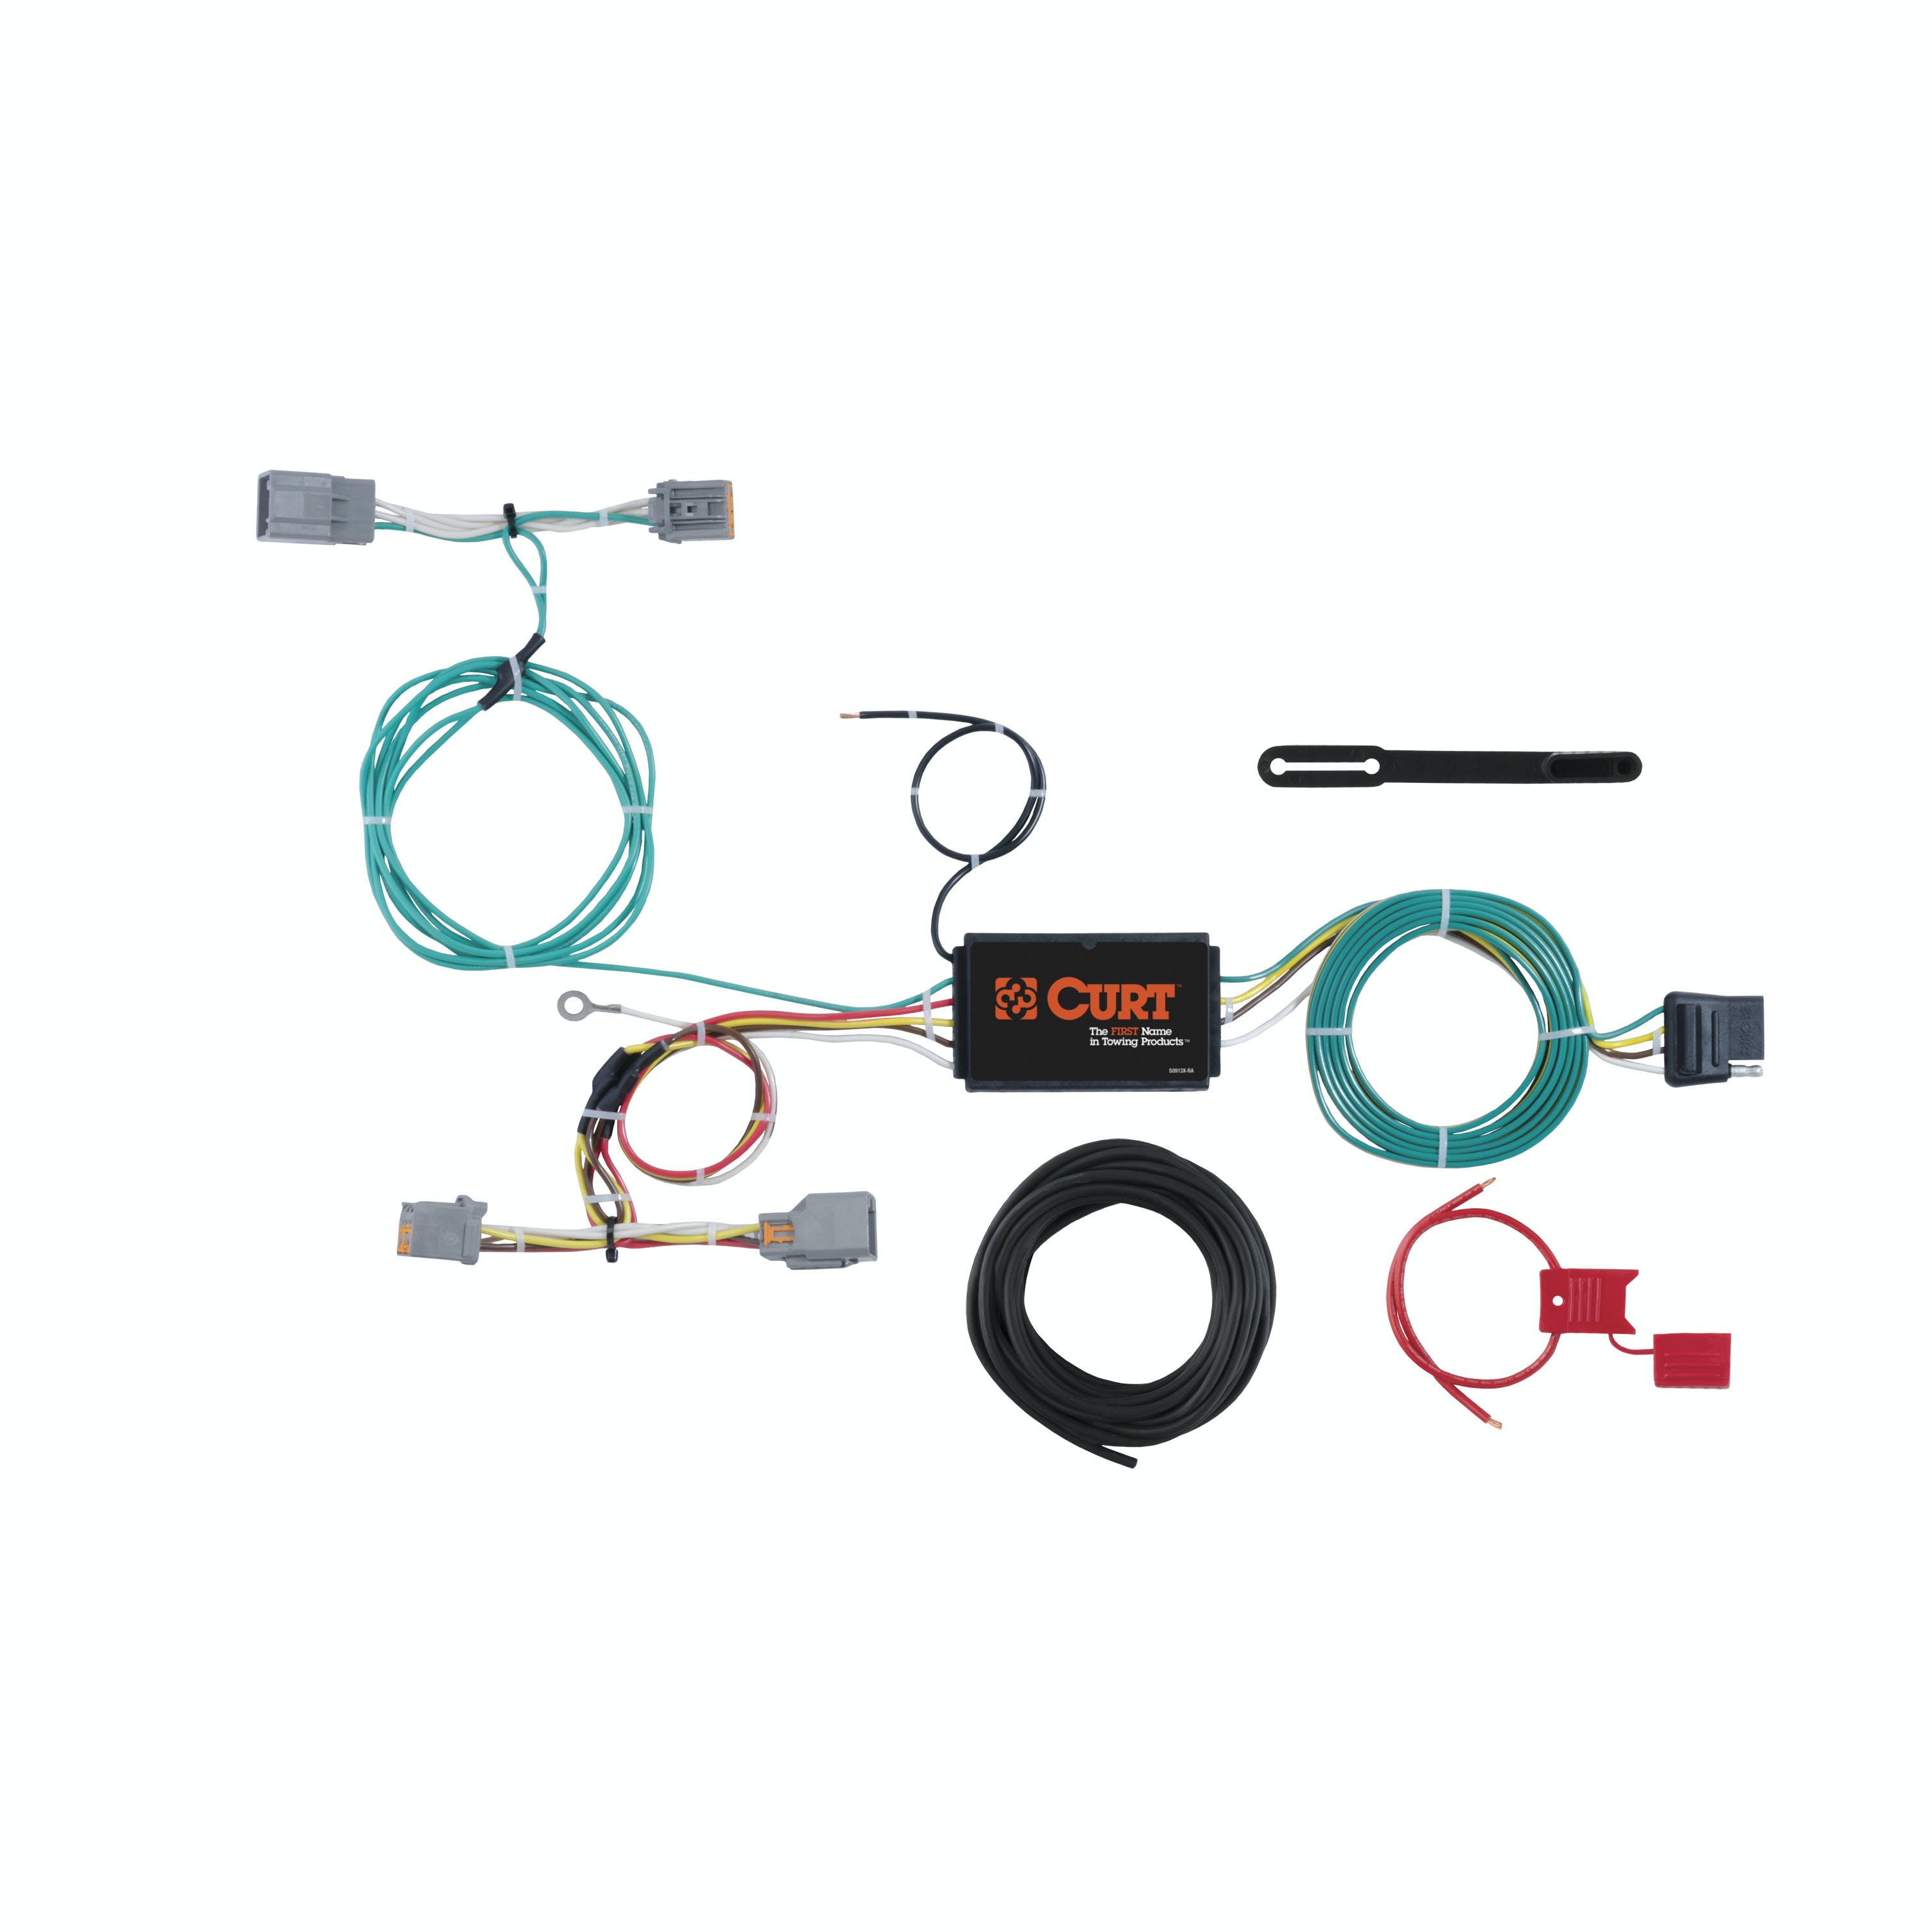 CURT 56287 Custom Wiring Harness, 4-Way Flat Output, Select Volvo V60